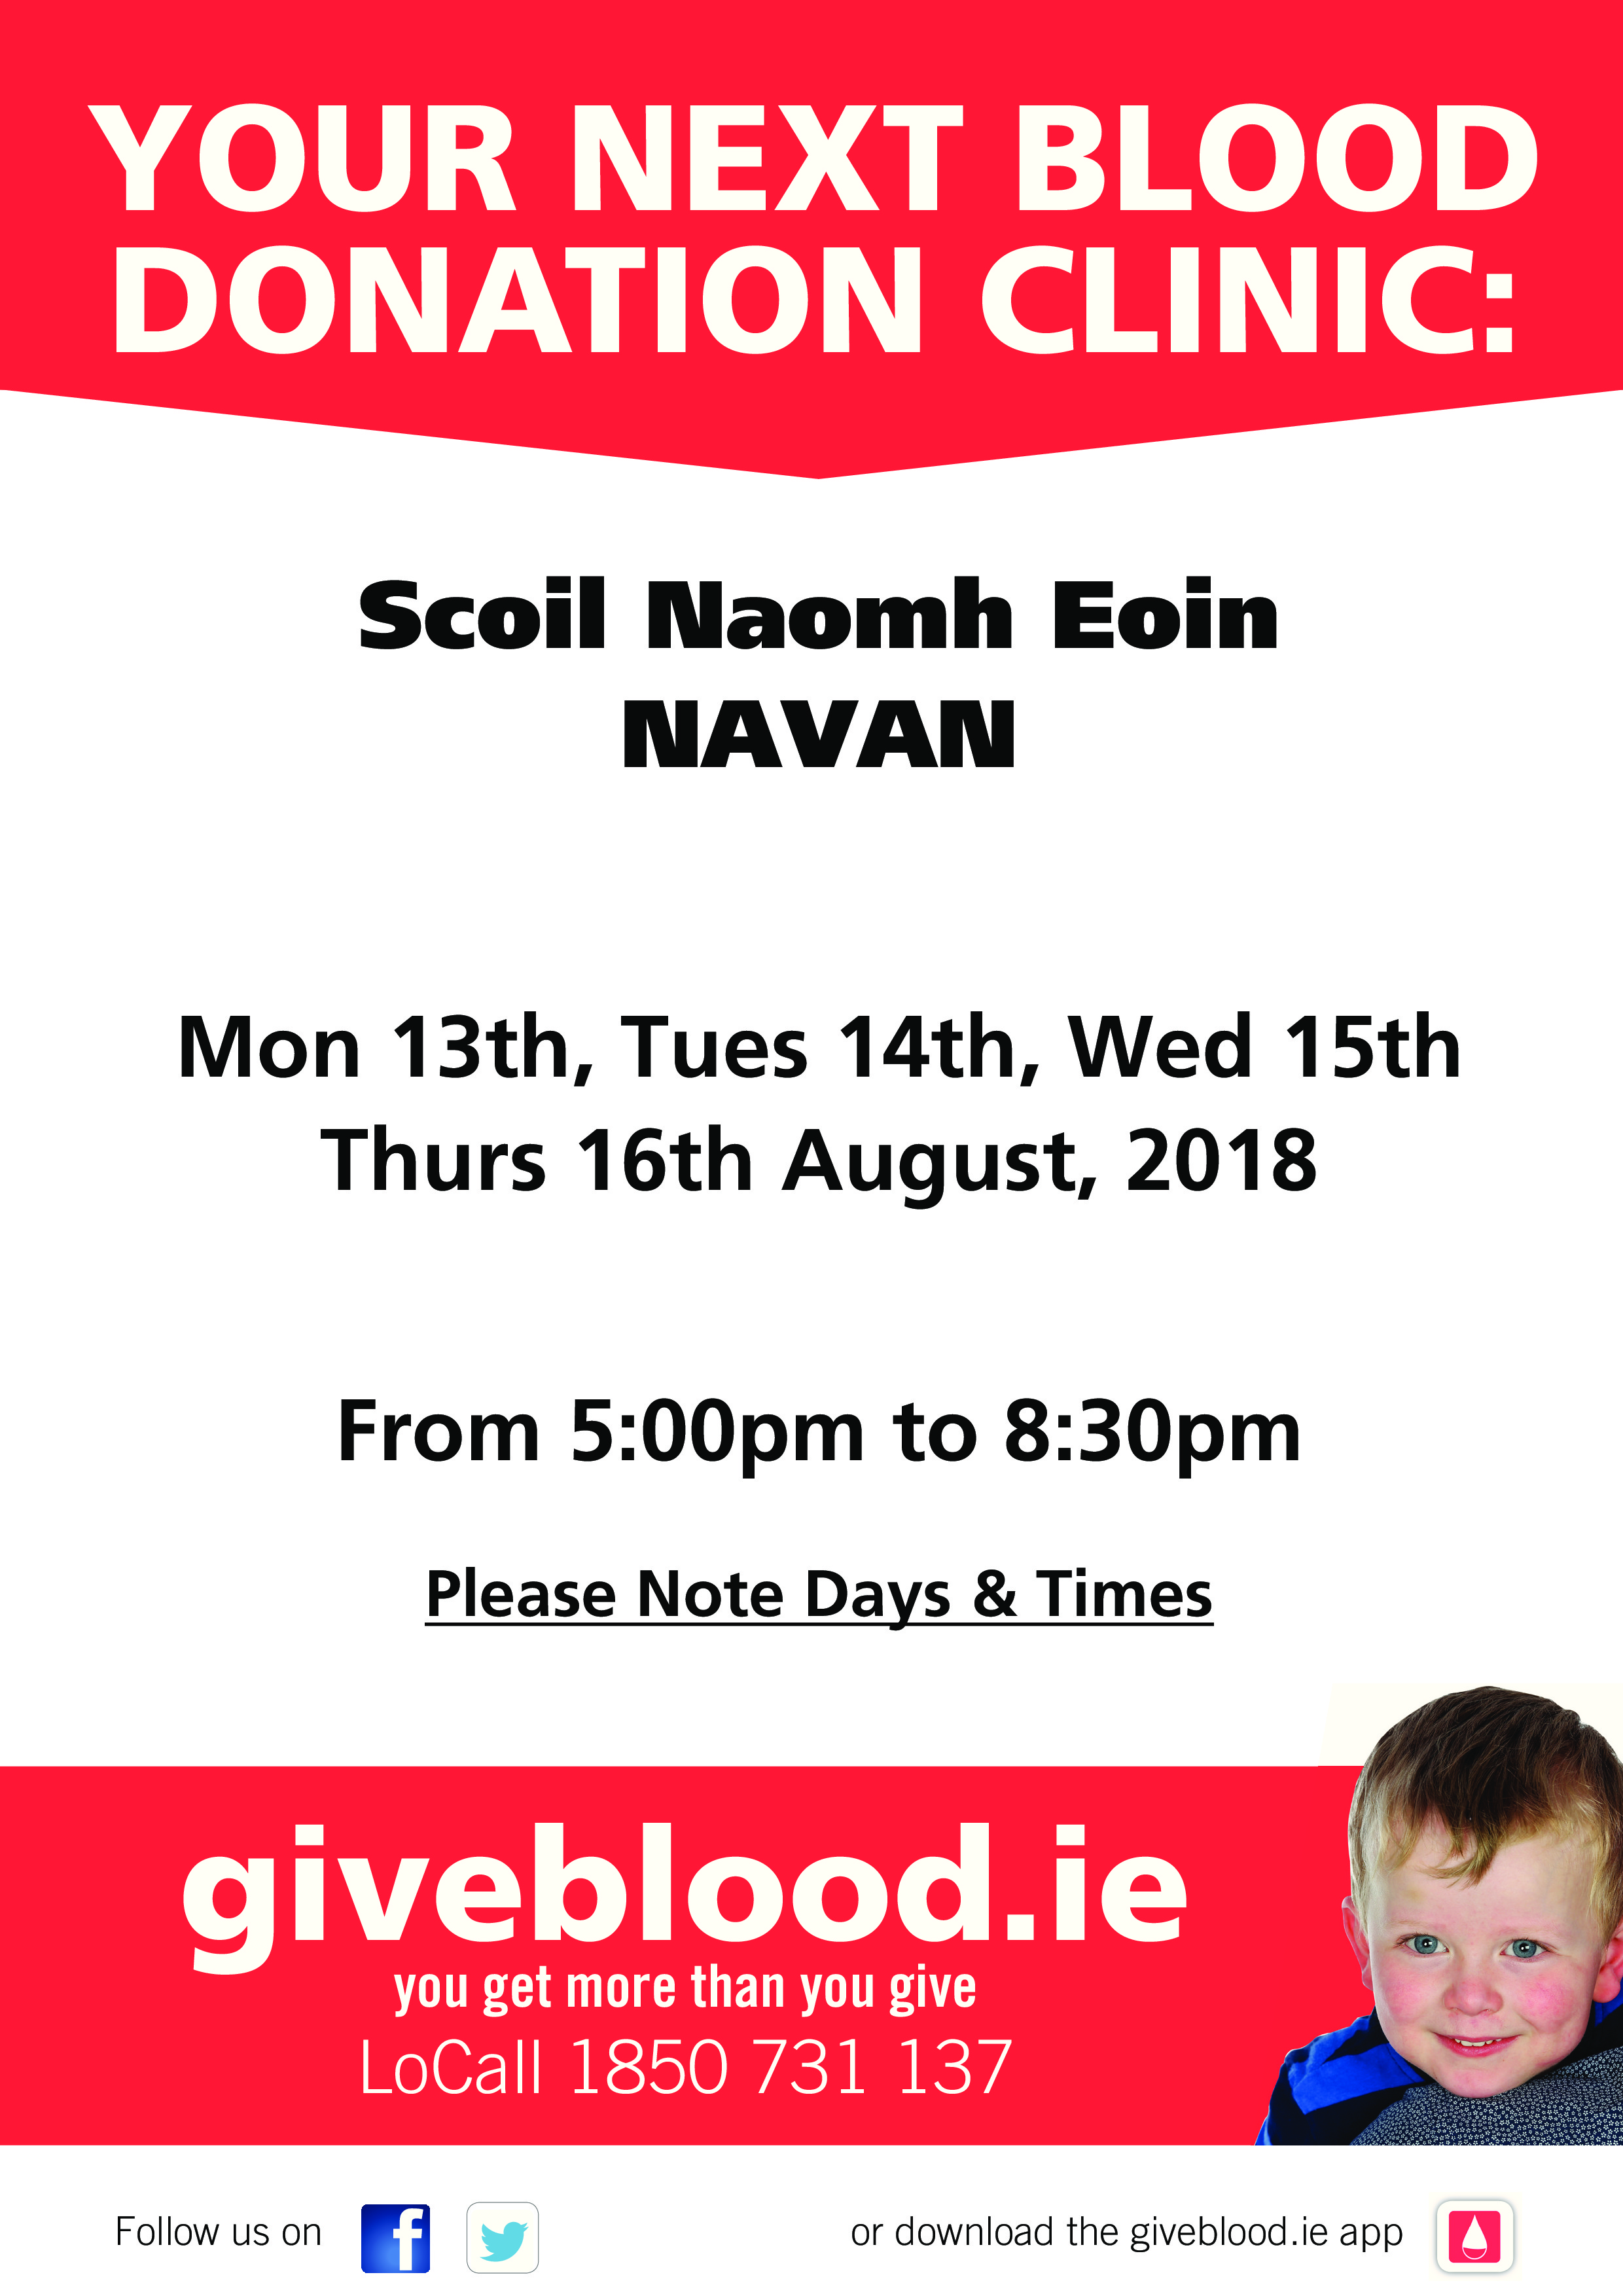 Reminder to Blood Donors in the Navan Area